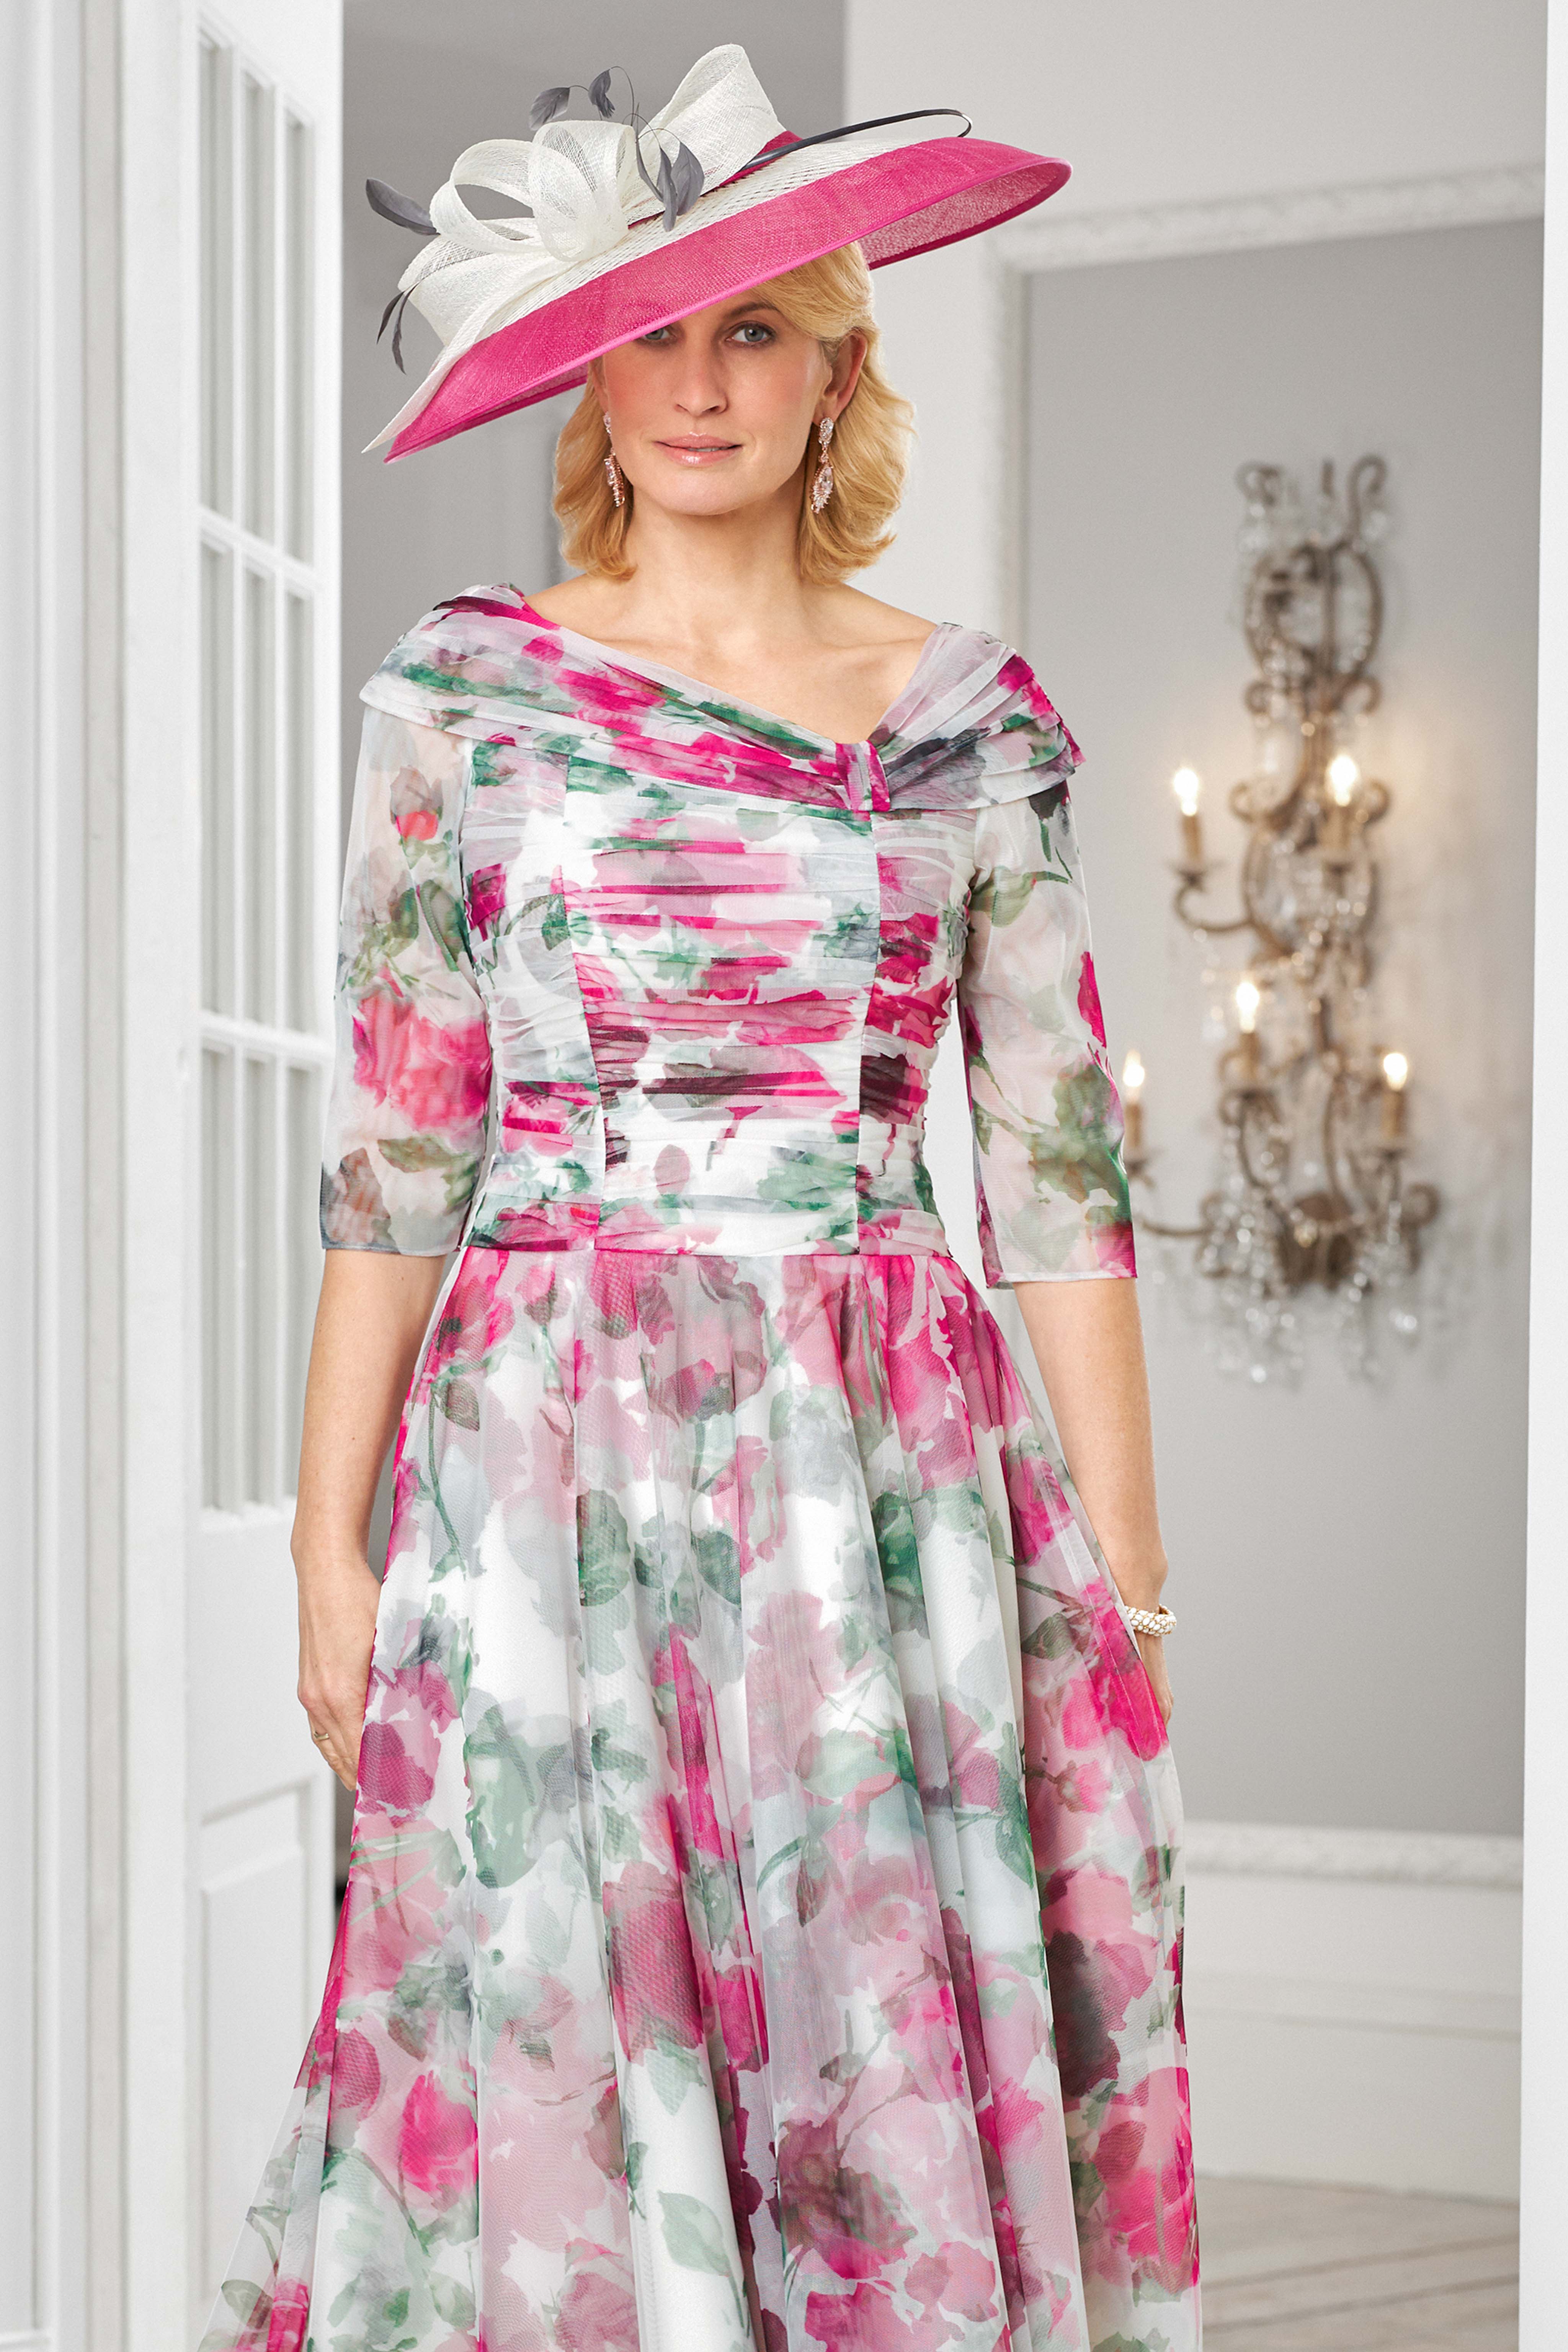 Wide neck dress with sleeves. 28985 - Catherines of Partick